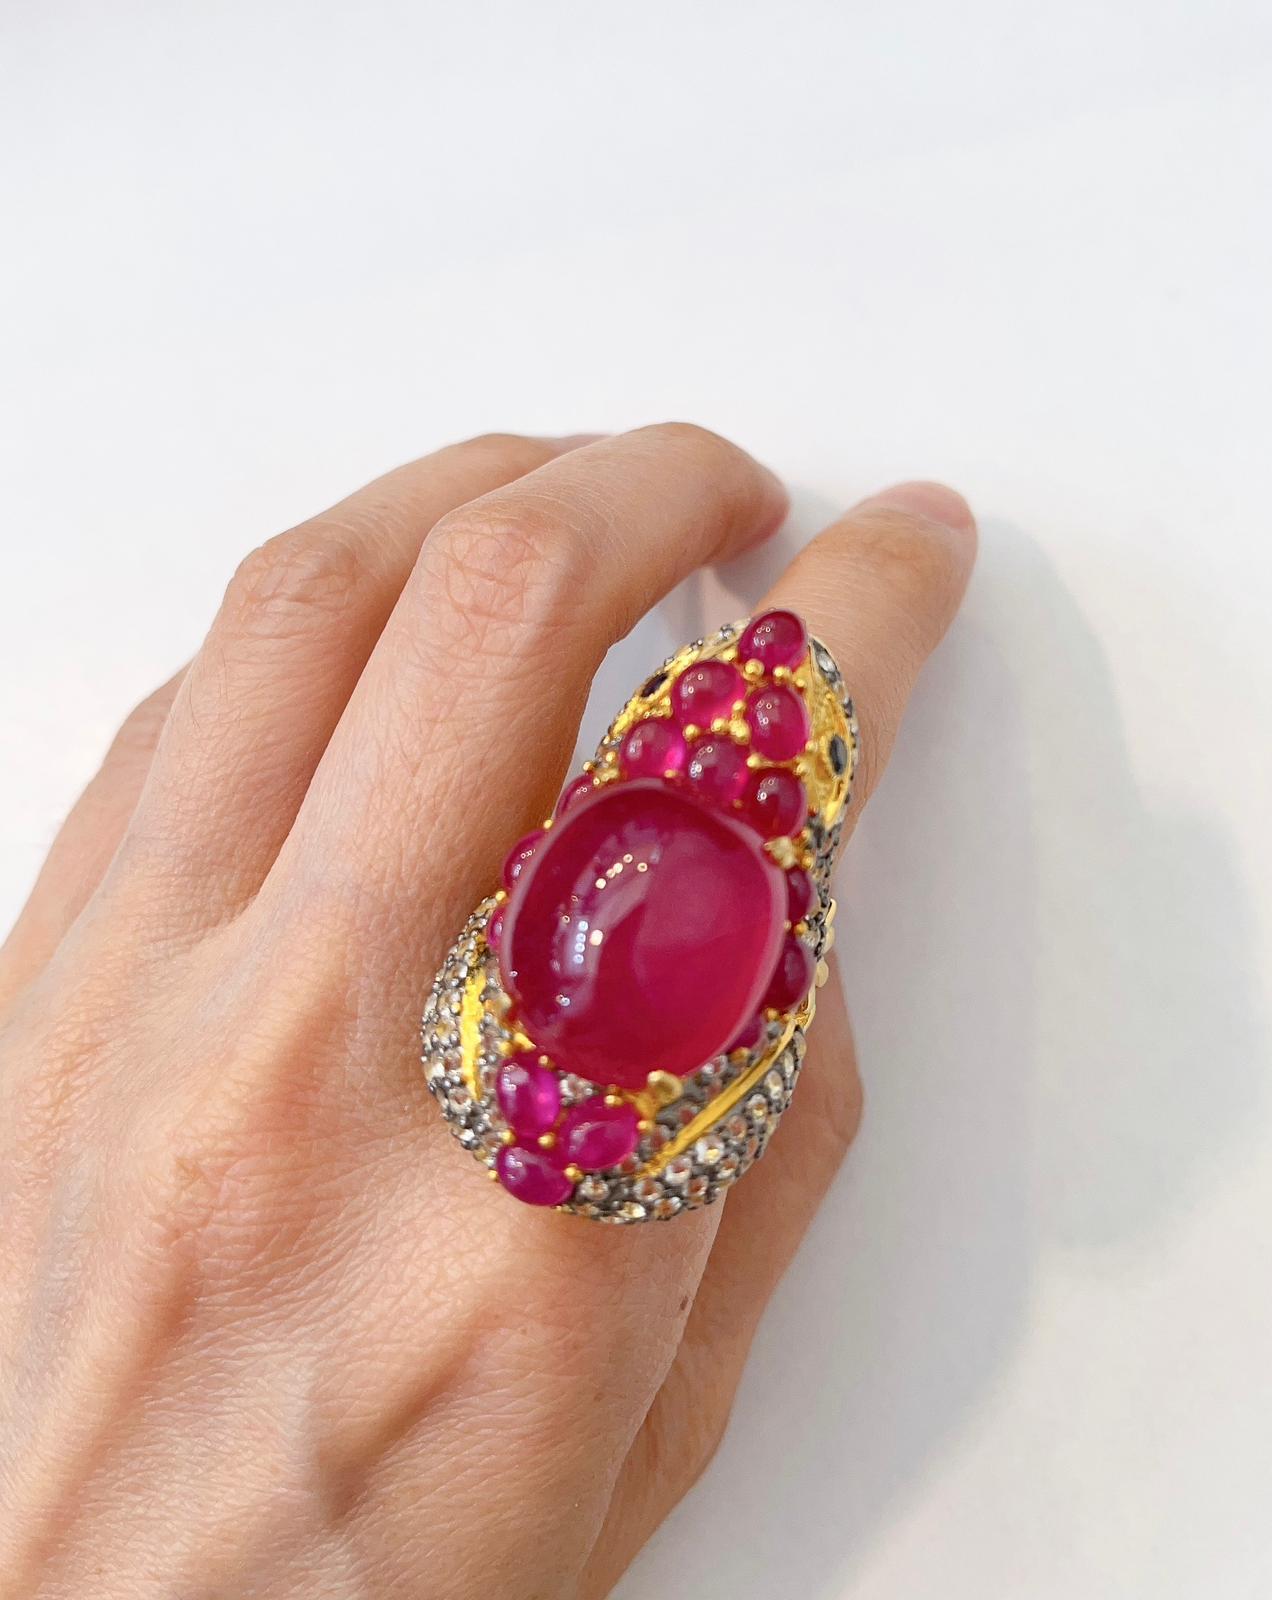 “Orient” Red Ruby & White Topaz Cocktail Ring Set in 22k Gold & Silver For Sale 8